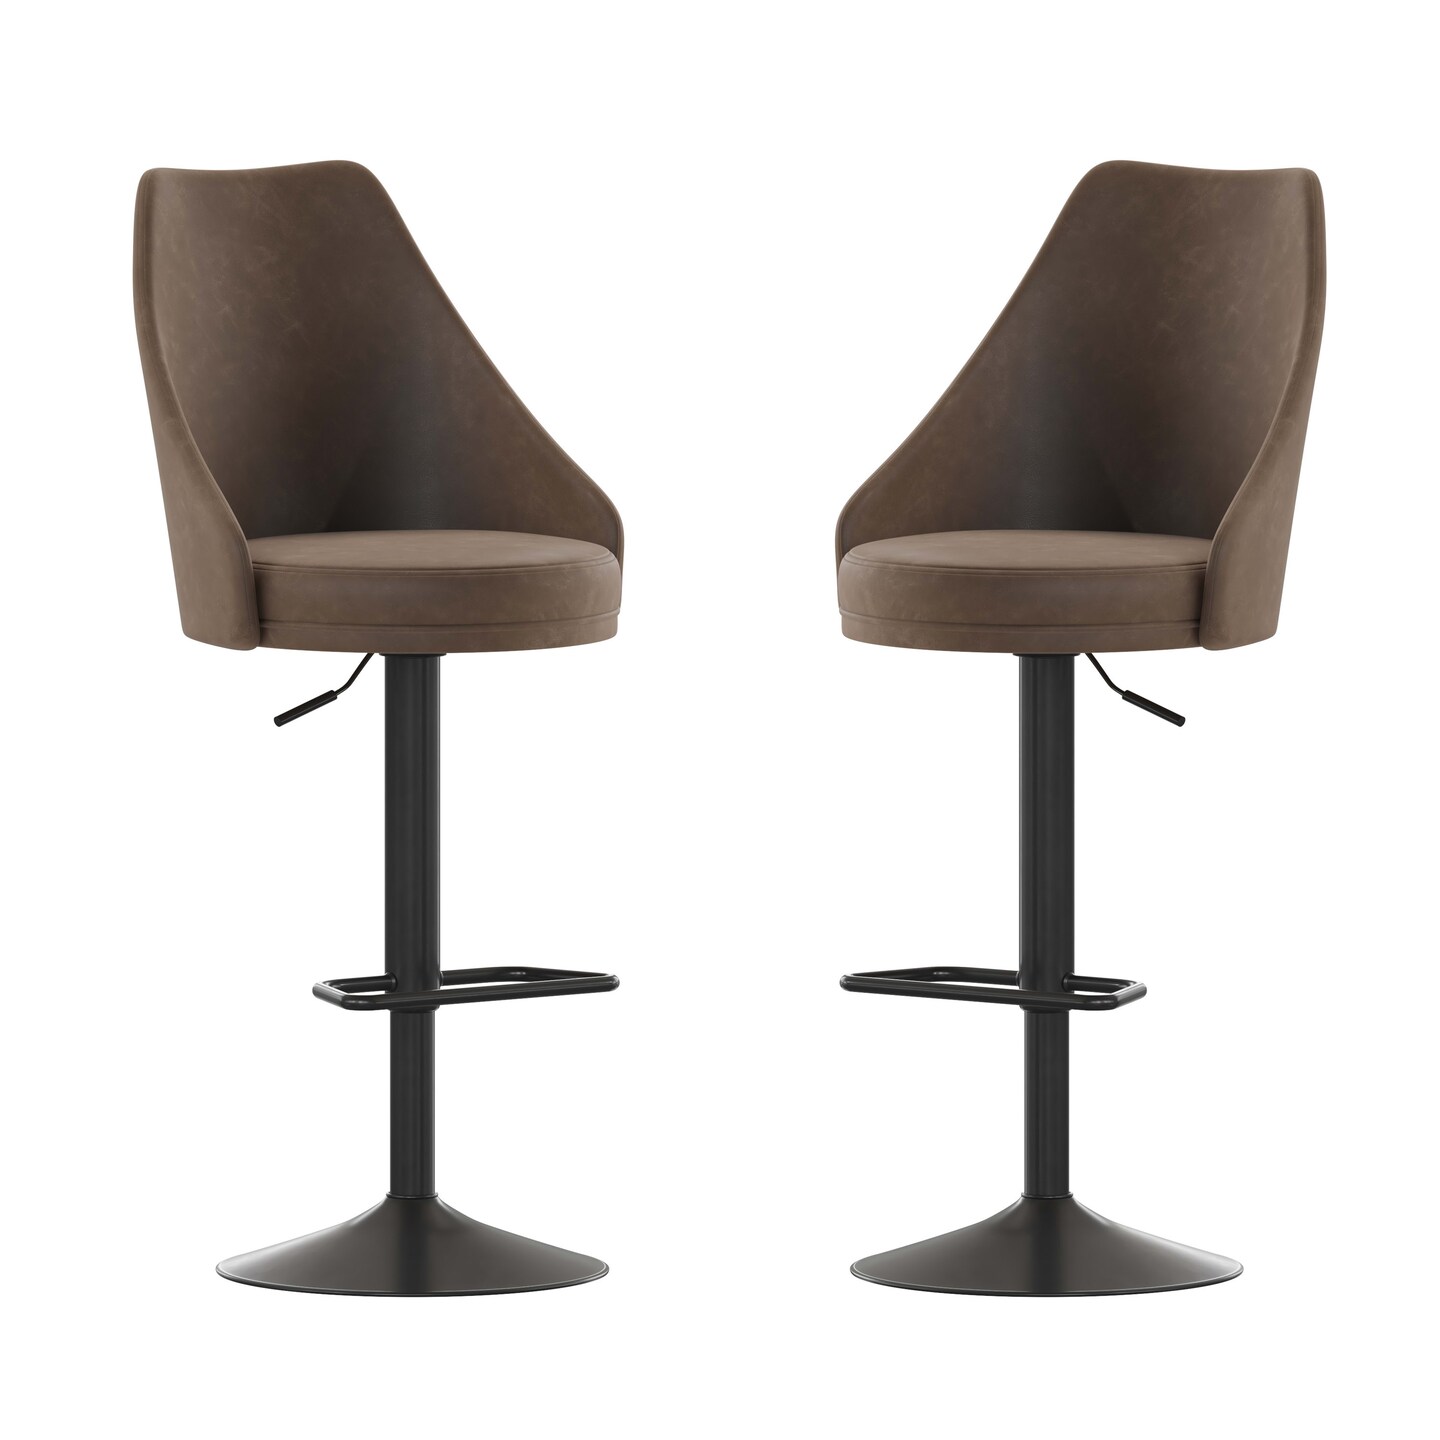 Merrick Lane Mischa Set of Two Adjustable Height Dining Stools with Tufted Upholstered Seats and Pedestal Base with Footring